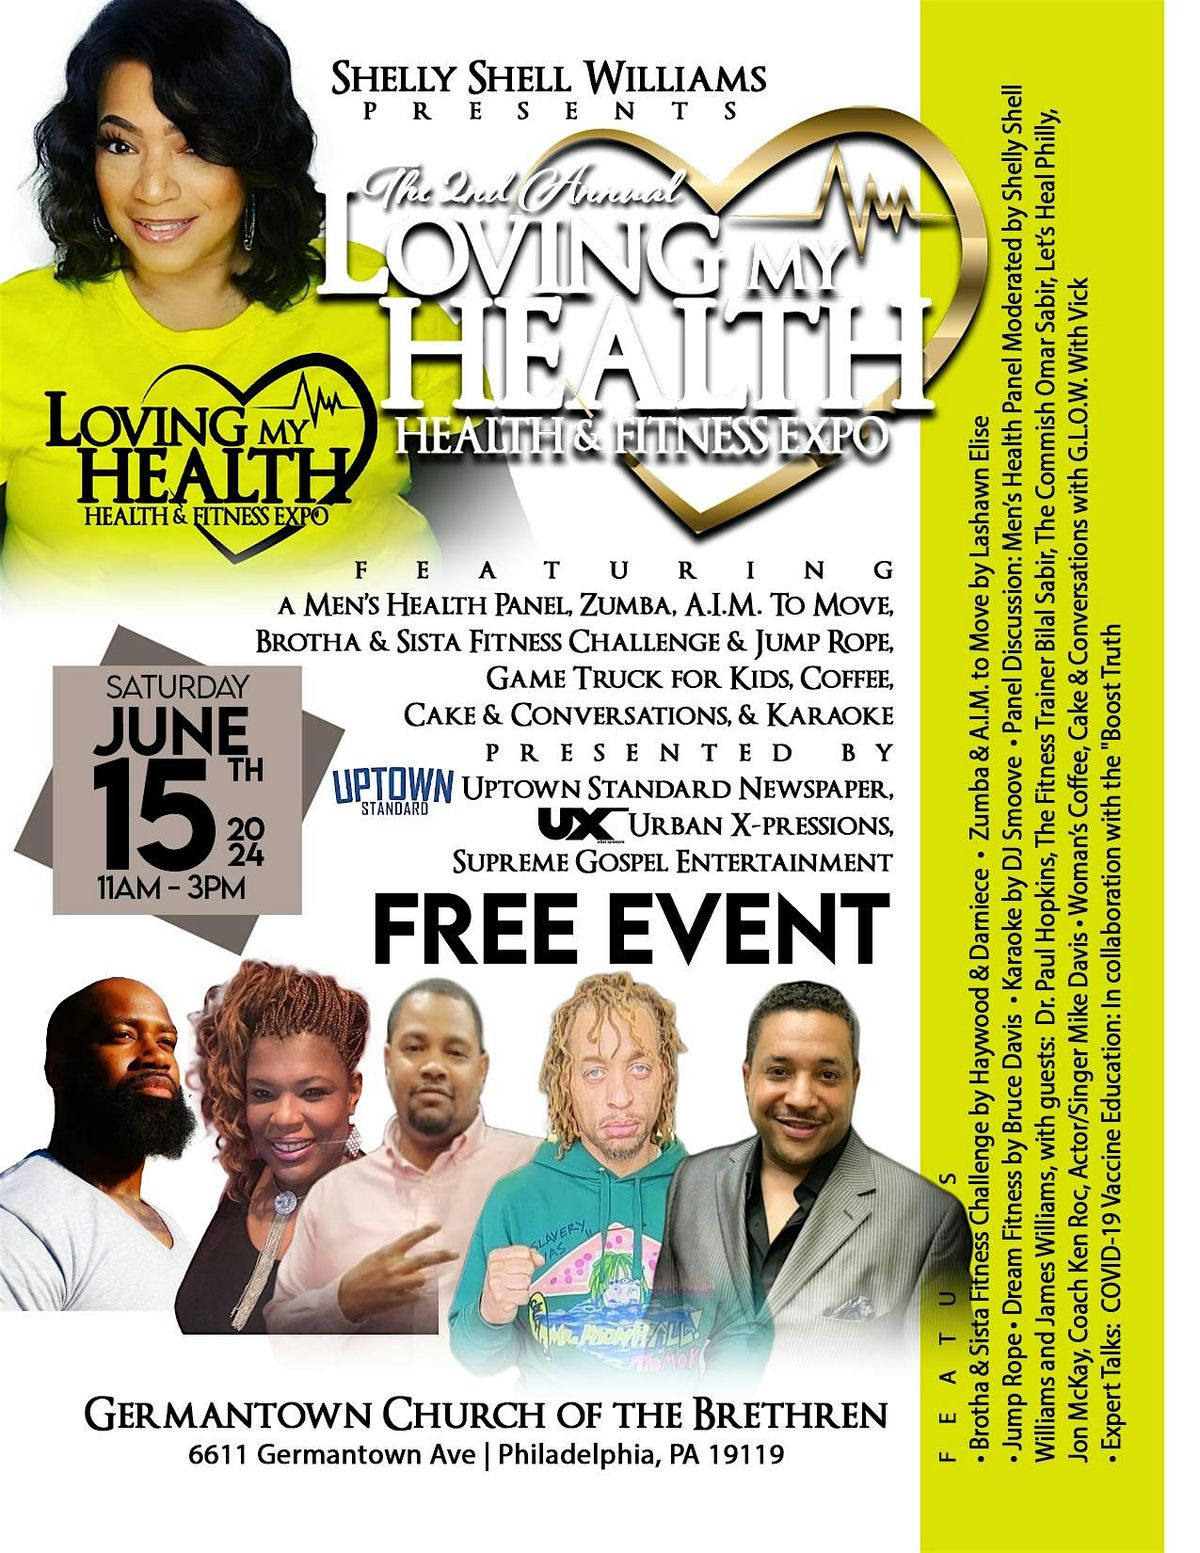 2nd Annual Loving My Health (Health & Fitness Expo)